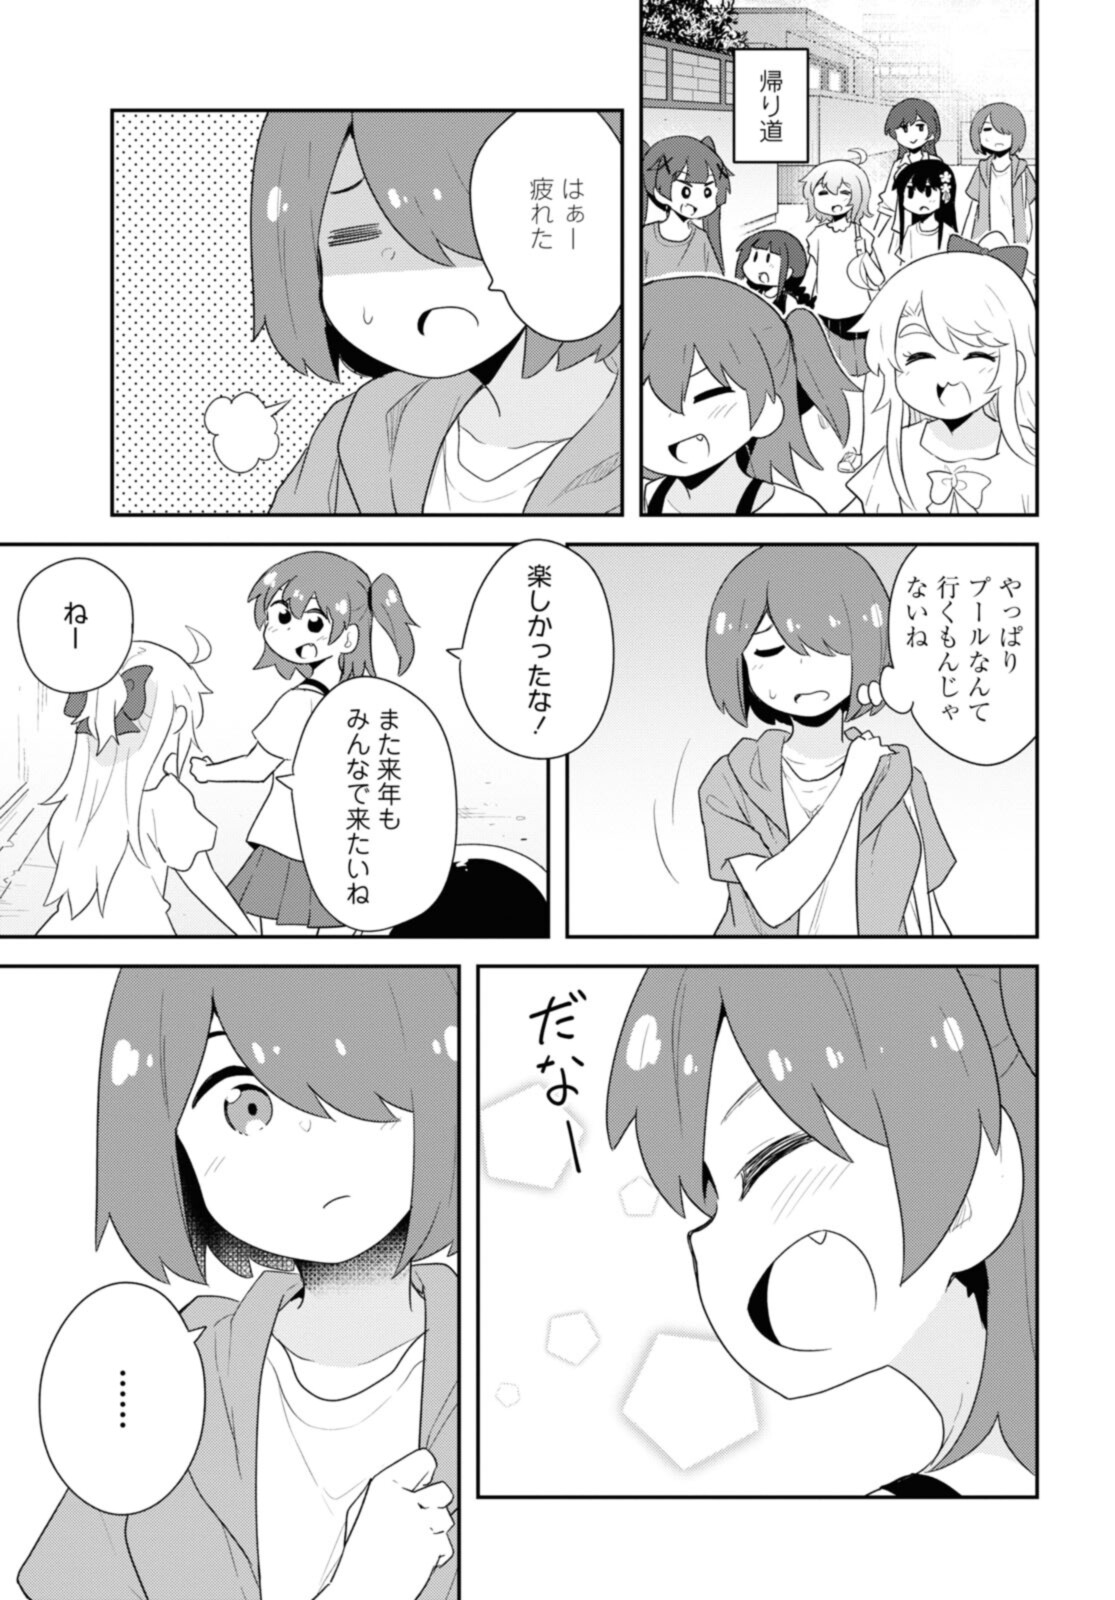 Wataten! An Angel Flew Down to Me 私に天使が舞い降りた！ 第95話 - Page 15